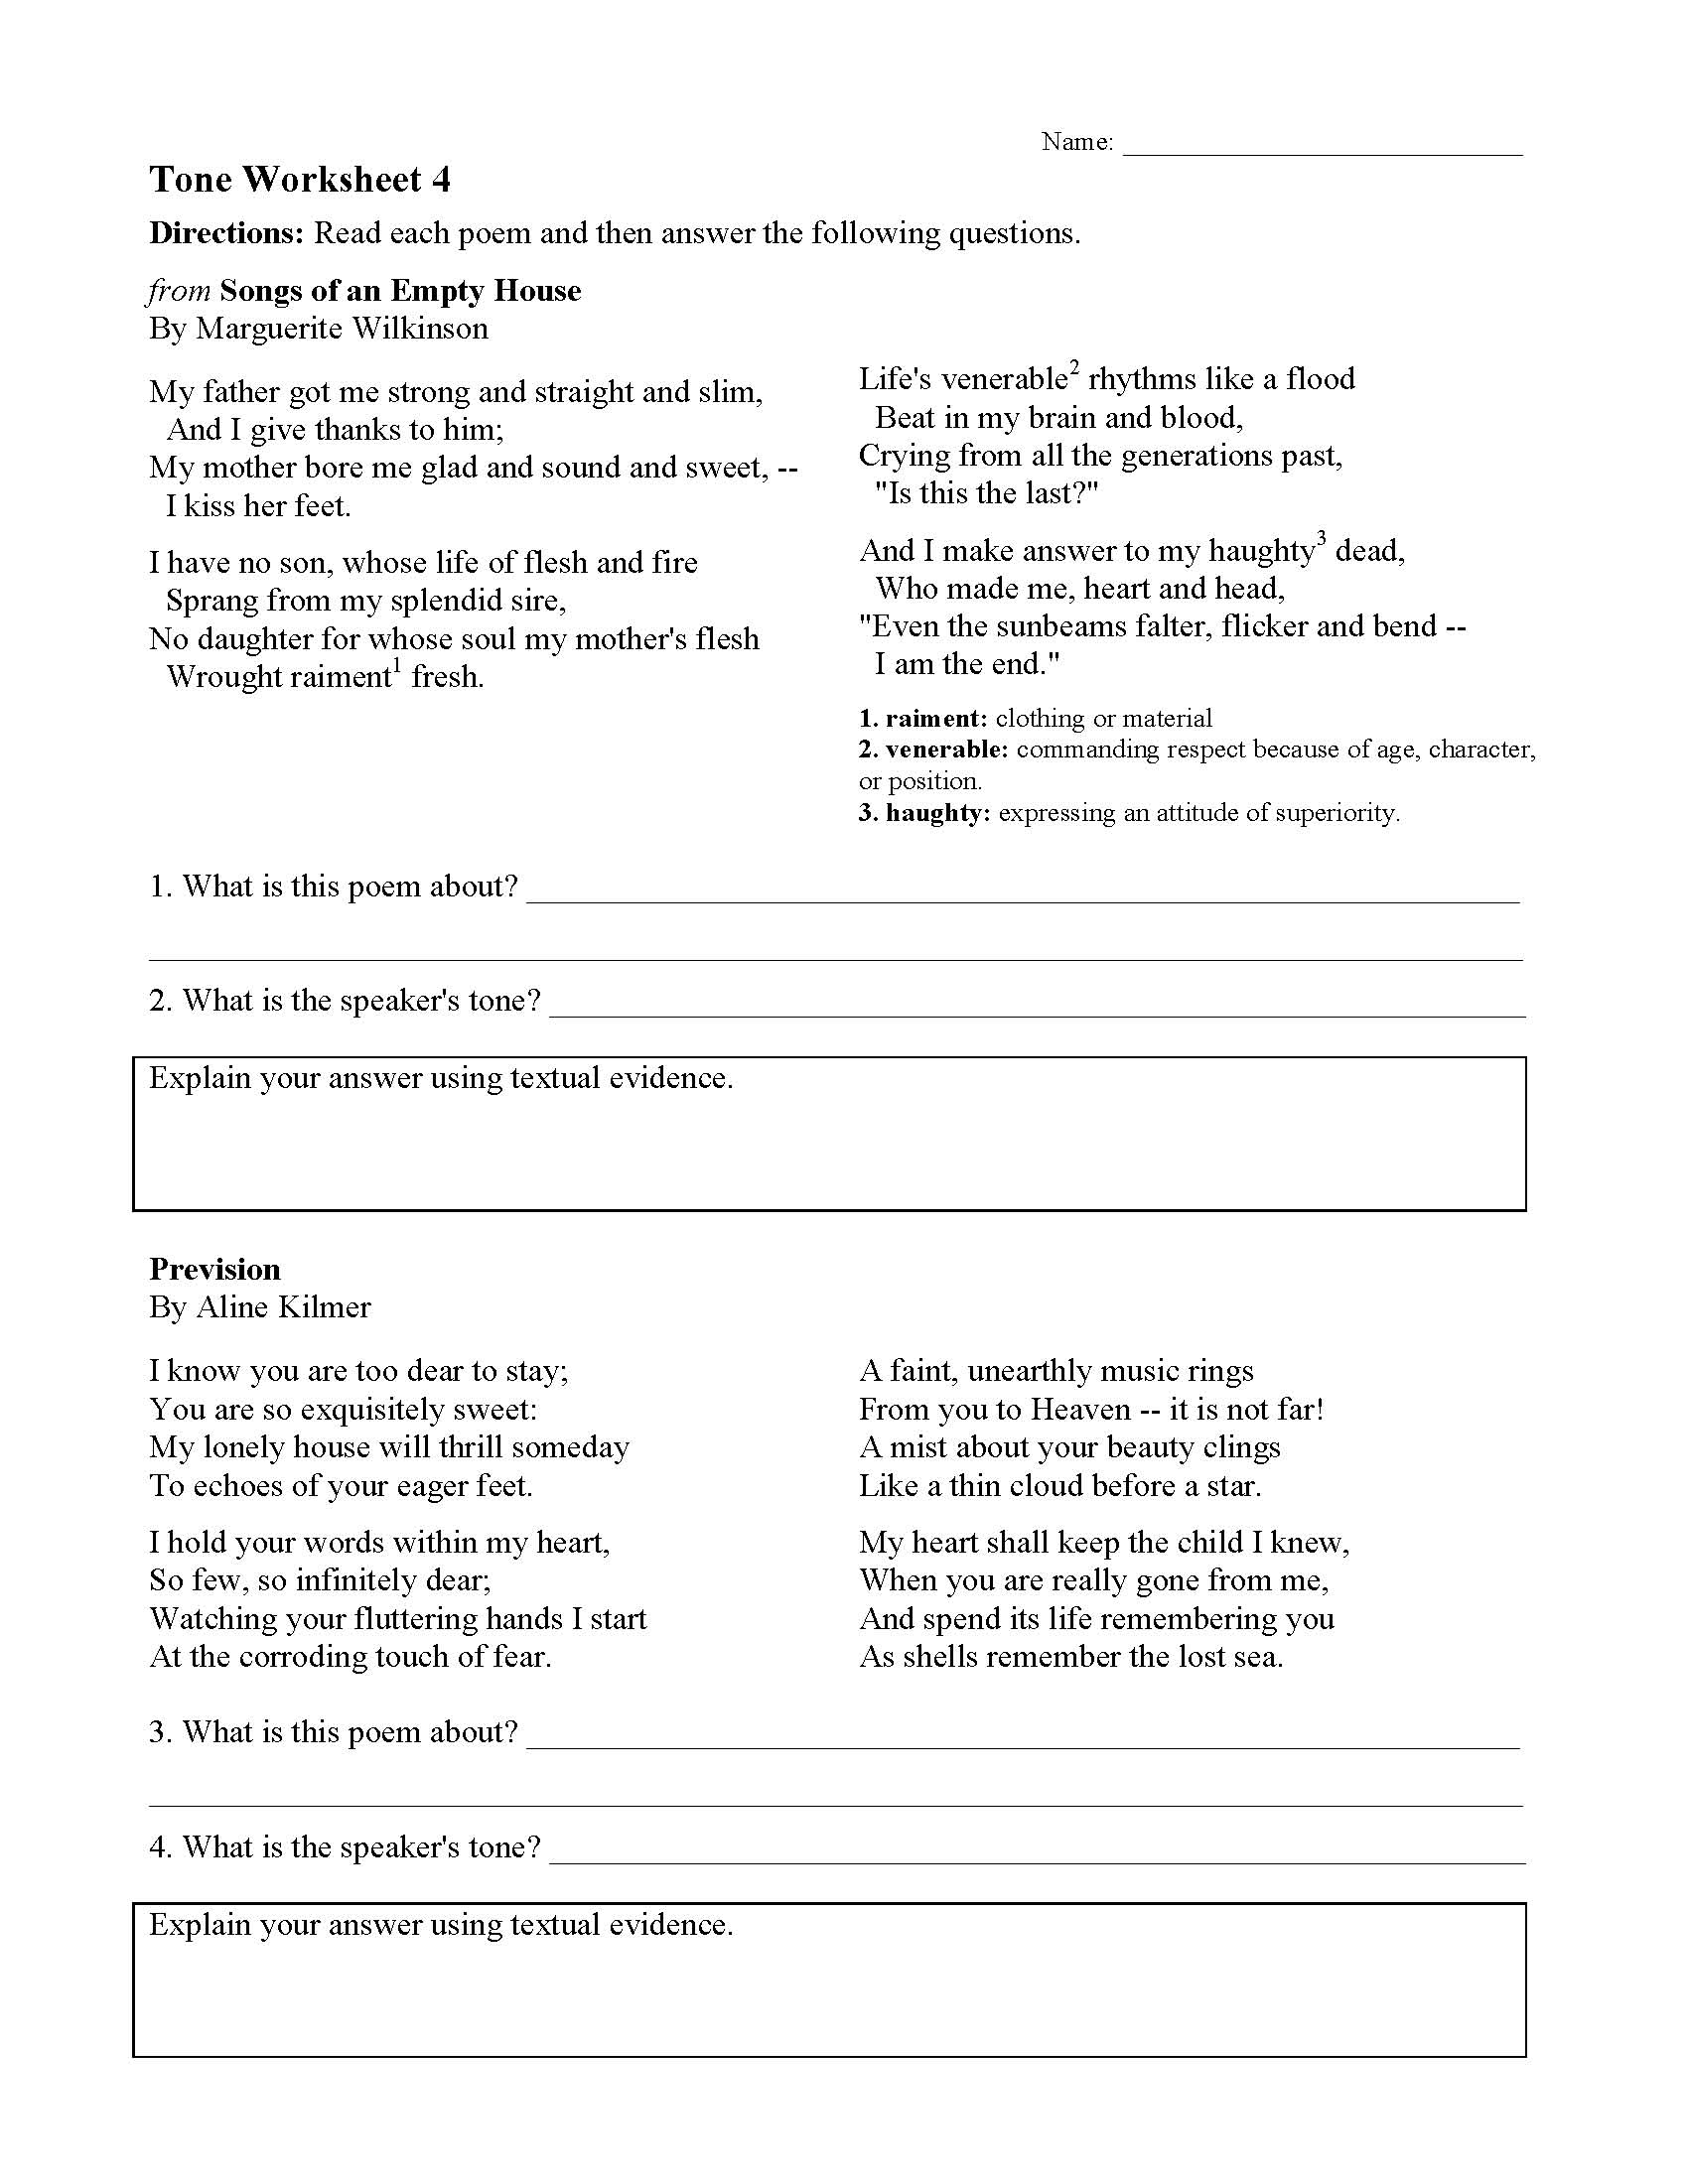 This is a preview image of Tone Worksheet 4. Click on it to enlarge it or view the source file.